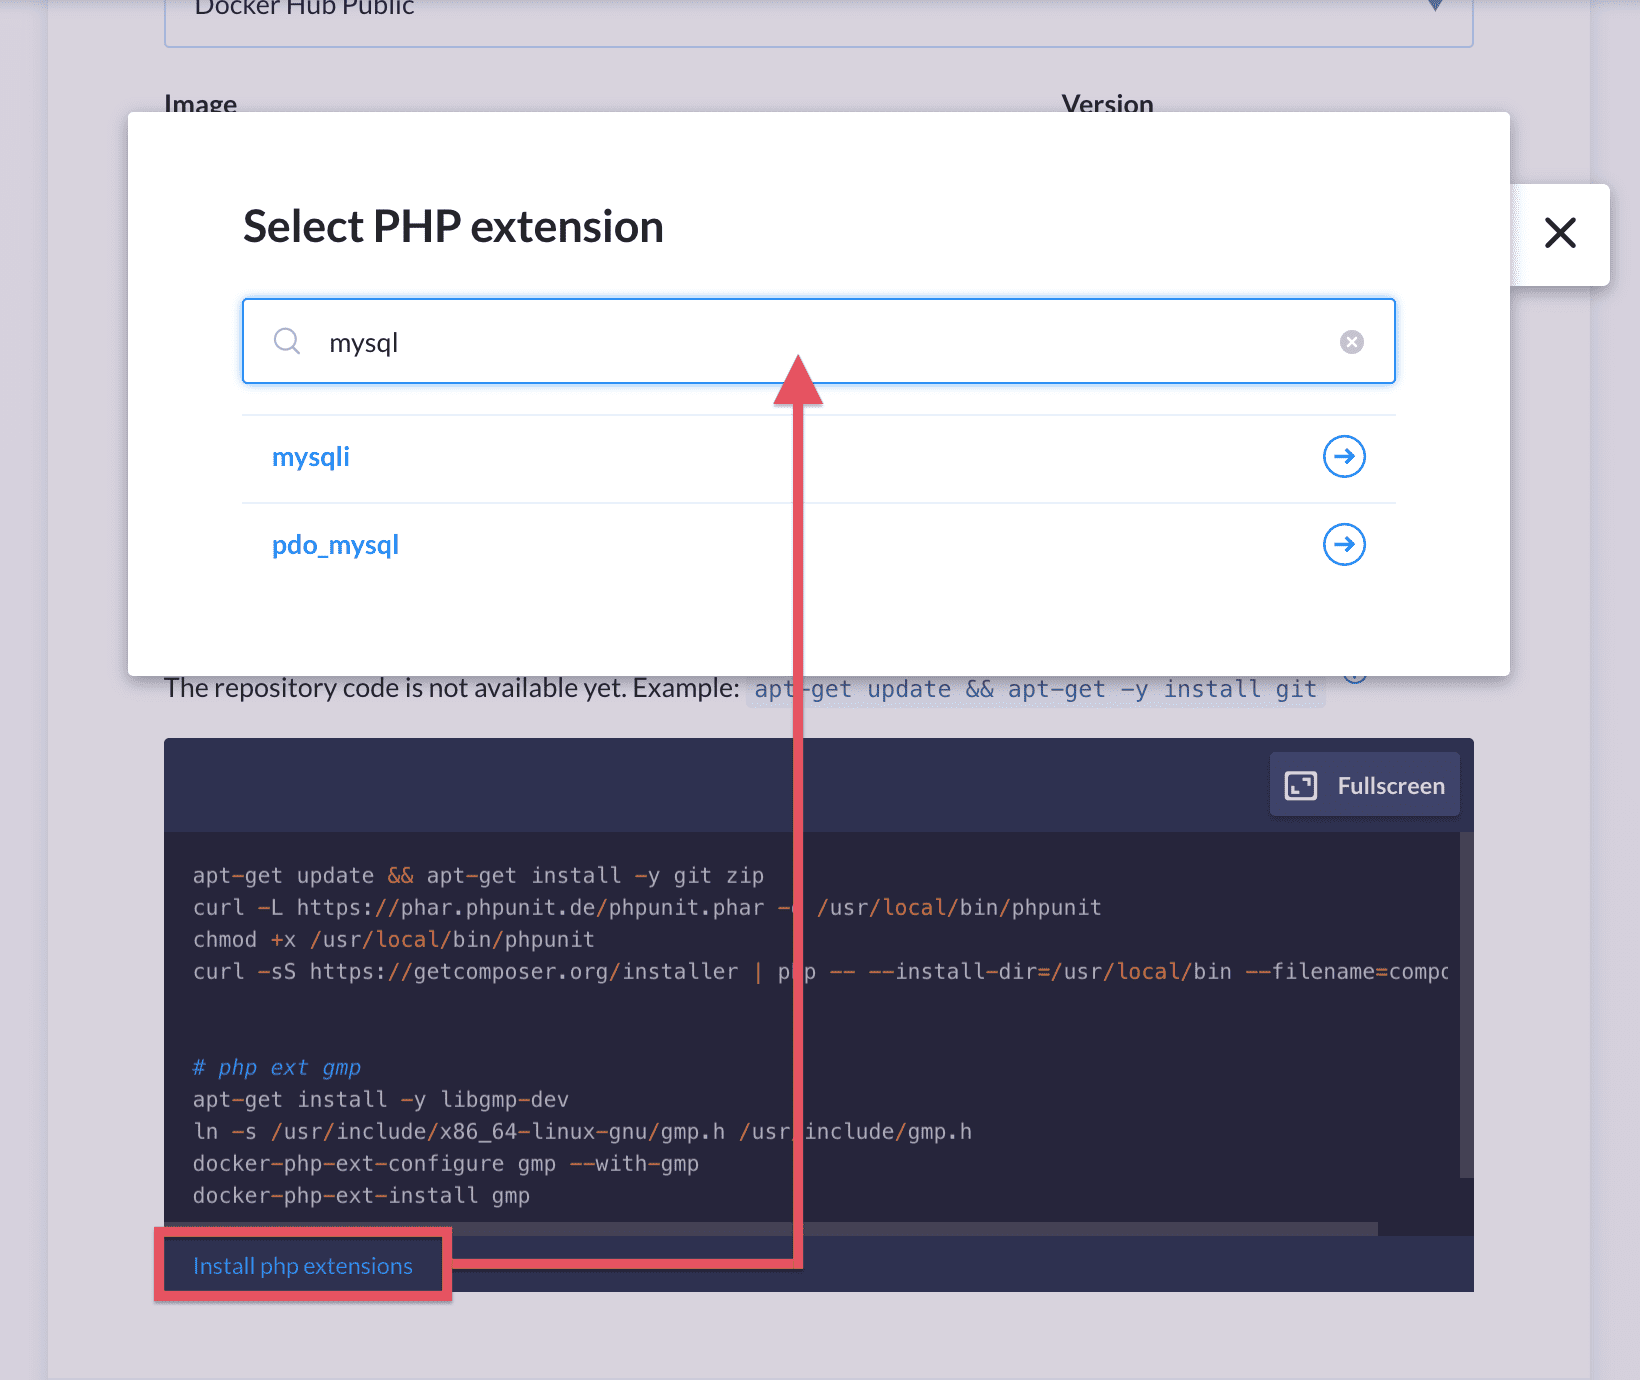 Selecting PHP extension